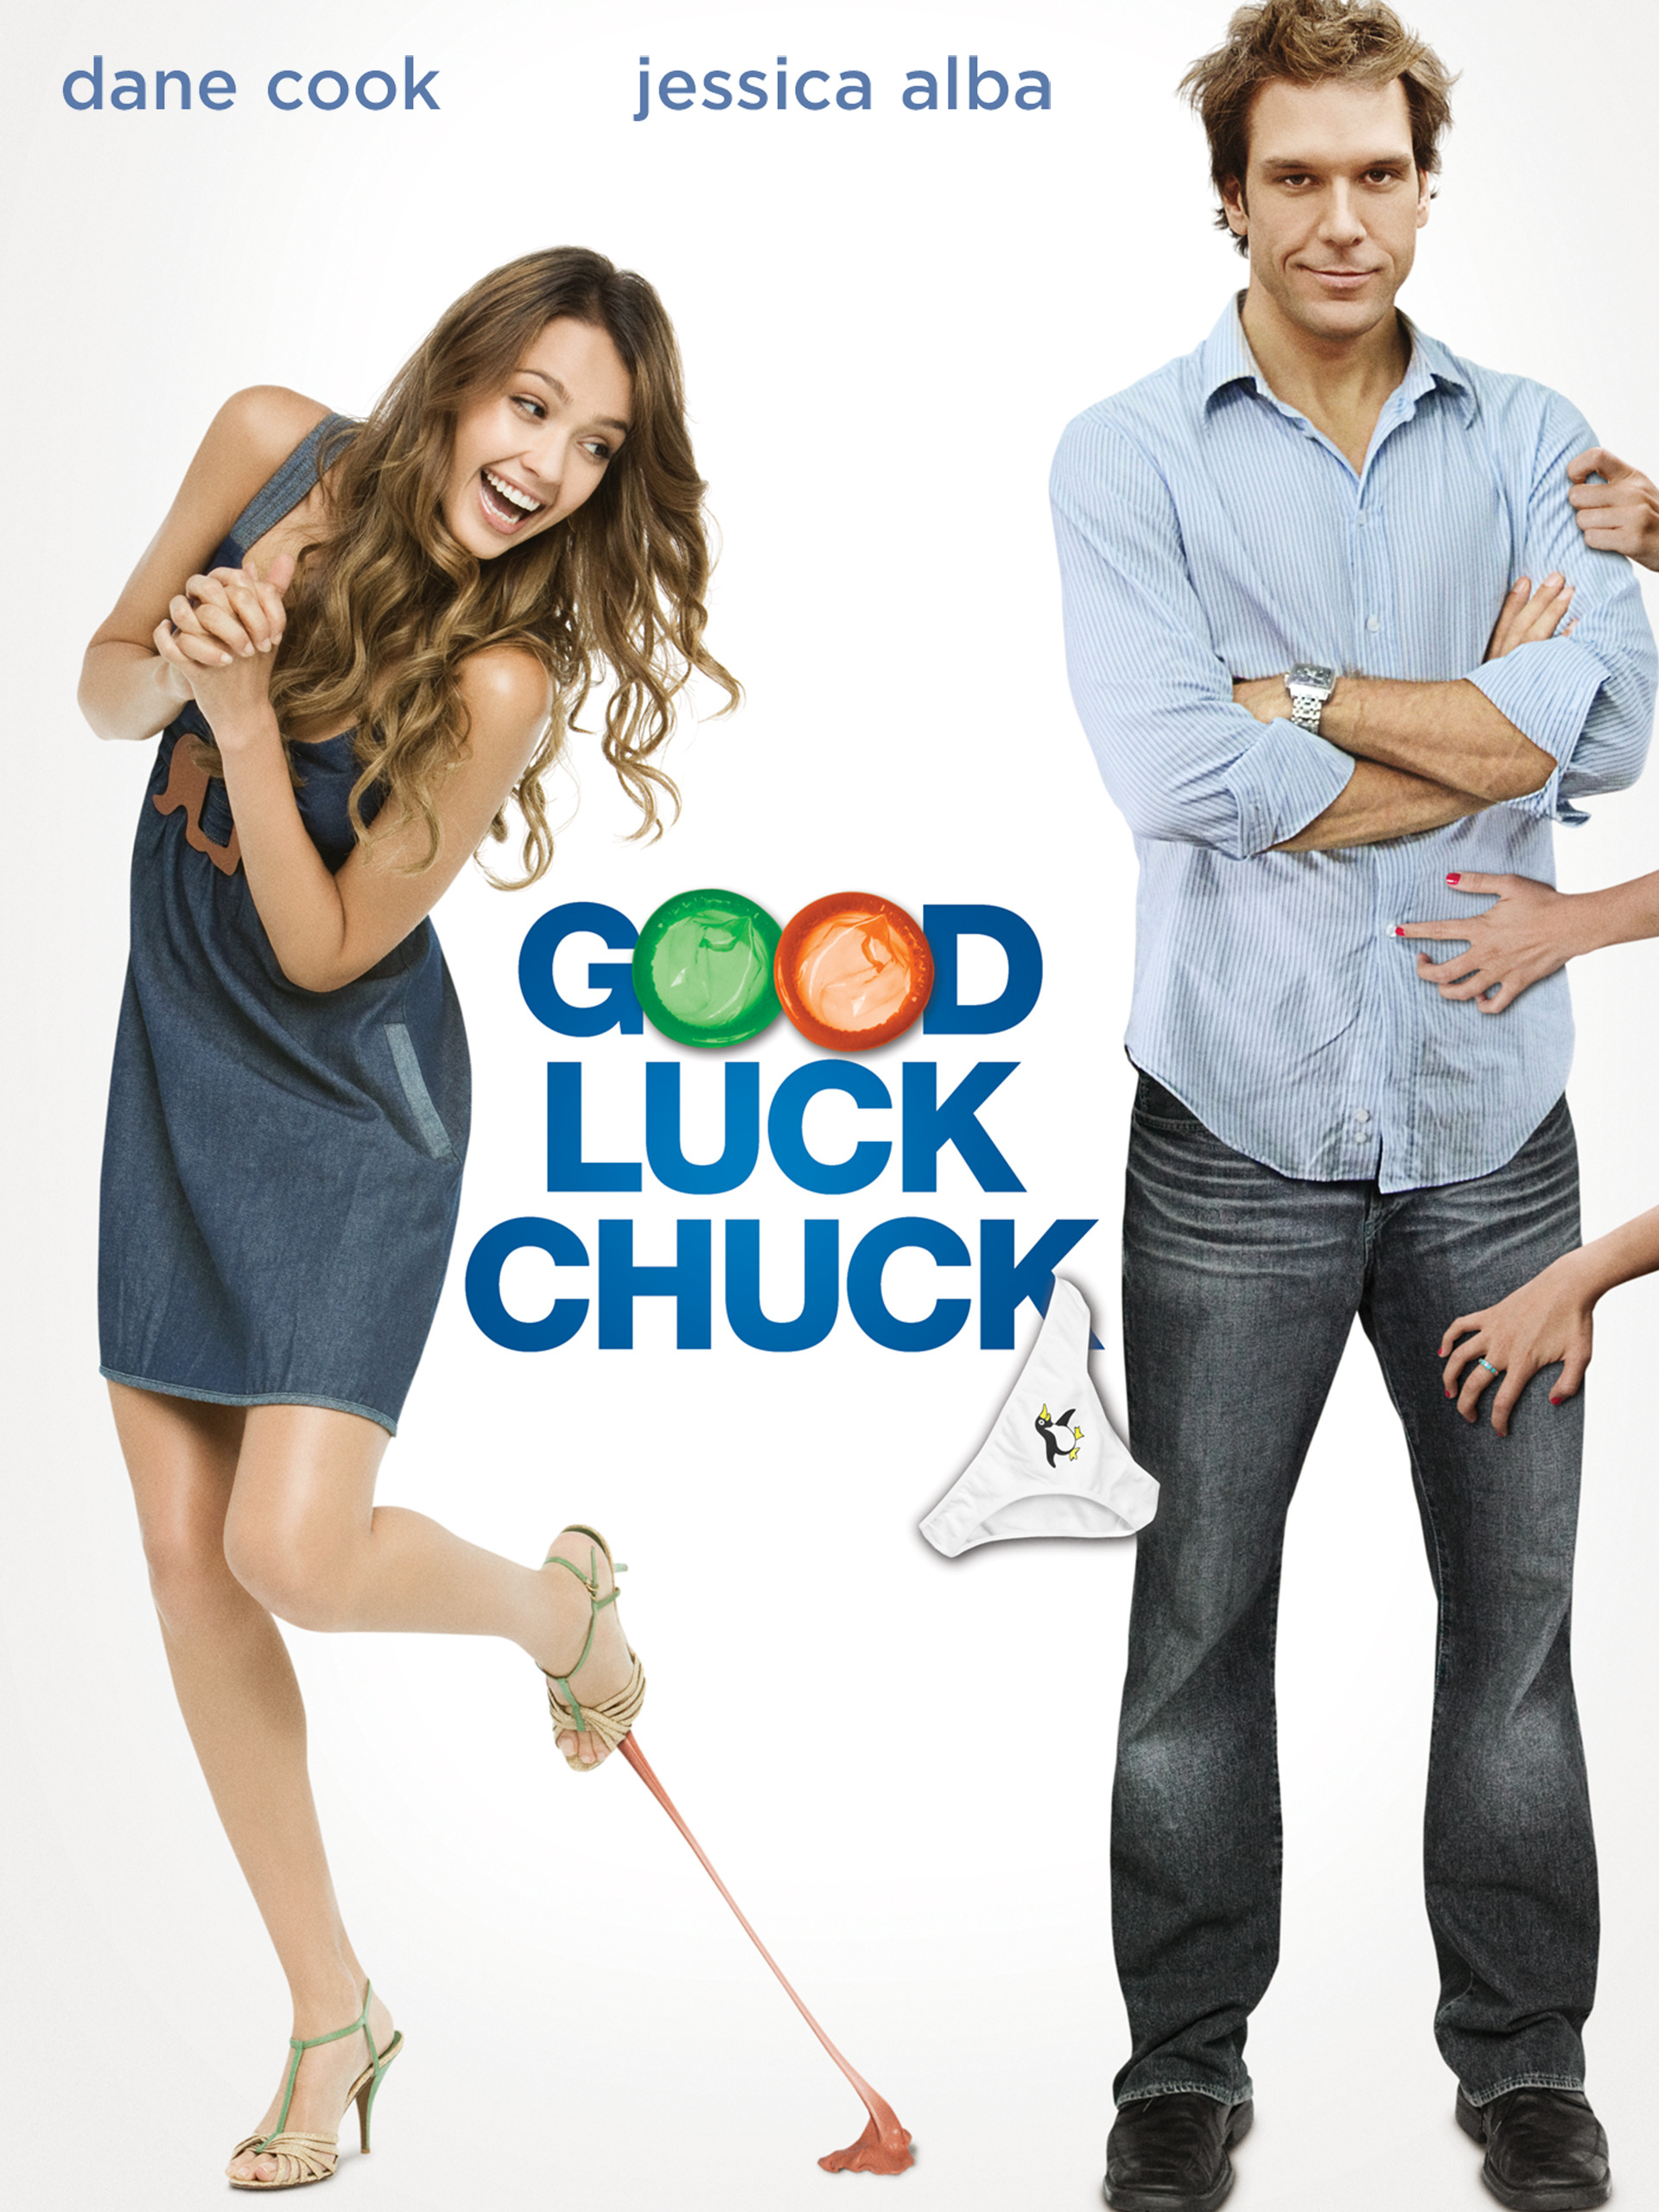 brendon mcguire recommends watch good luck chuck online free pic